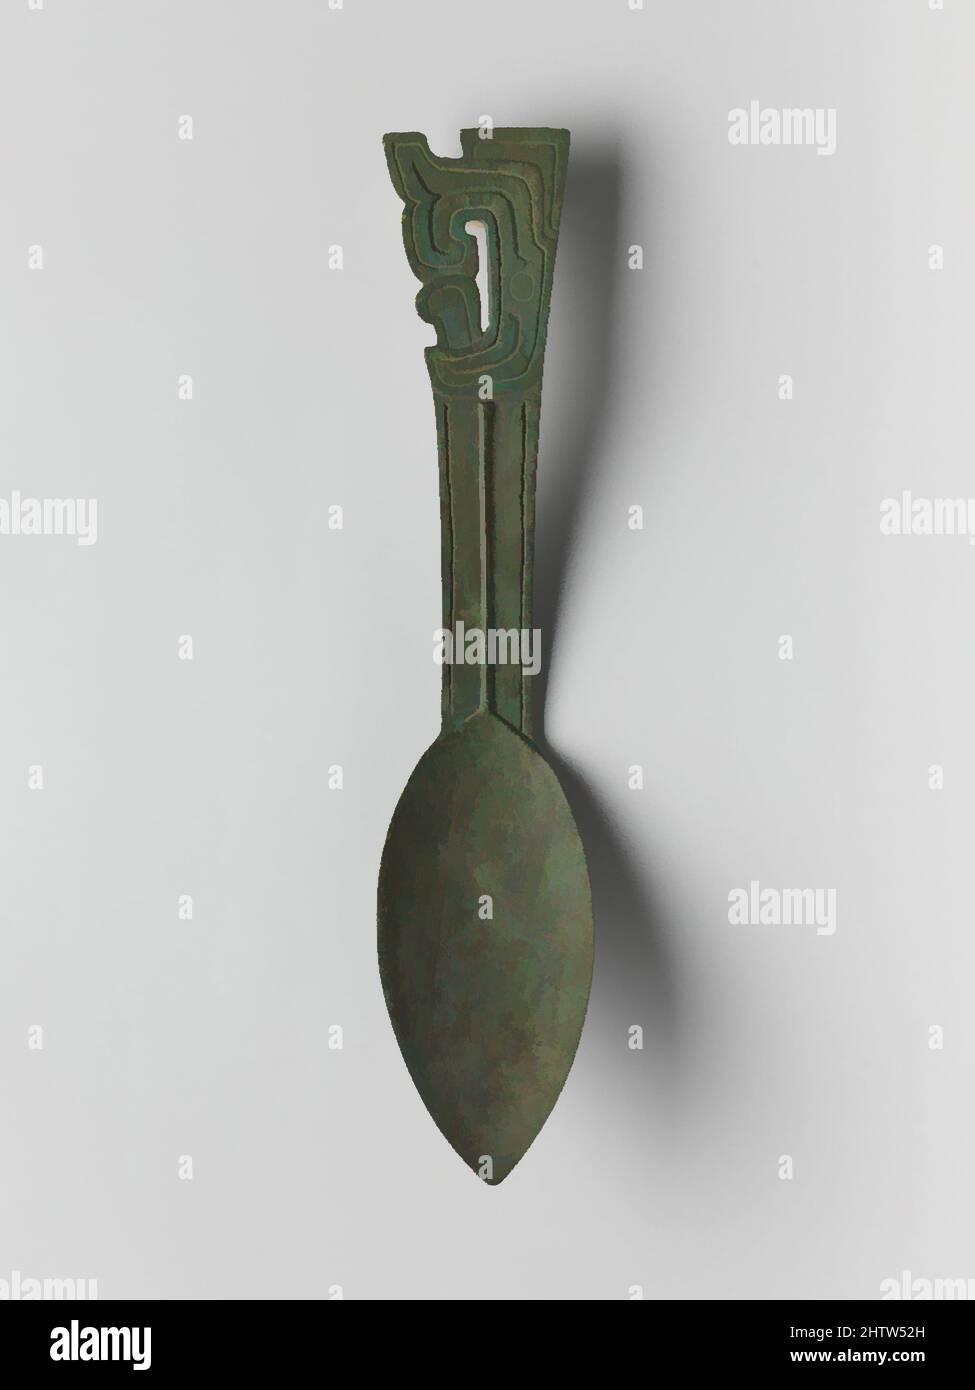 Art inspired by 匕, Ritual Spoon (Bi), mid-Zhou dynasty (1046–256 B.C.), China, Bronze, W. 2 1/2 in. (6.4 cm); L. 12 3/4 in. (32.4 cm); Wt. 1 lb. (0.5 kg), Metalwork, Classic works modernized by Artotop with a splash of modernity. Shapes, color and value, eye-catching visual impact on art. Emotions through freedom of artworks in a contemporary way. A timeless message pursuing a wildly creative new direction. Artists turning to the digital medium and creating the Artotop NFT Stock Photo